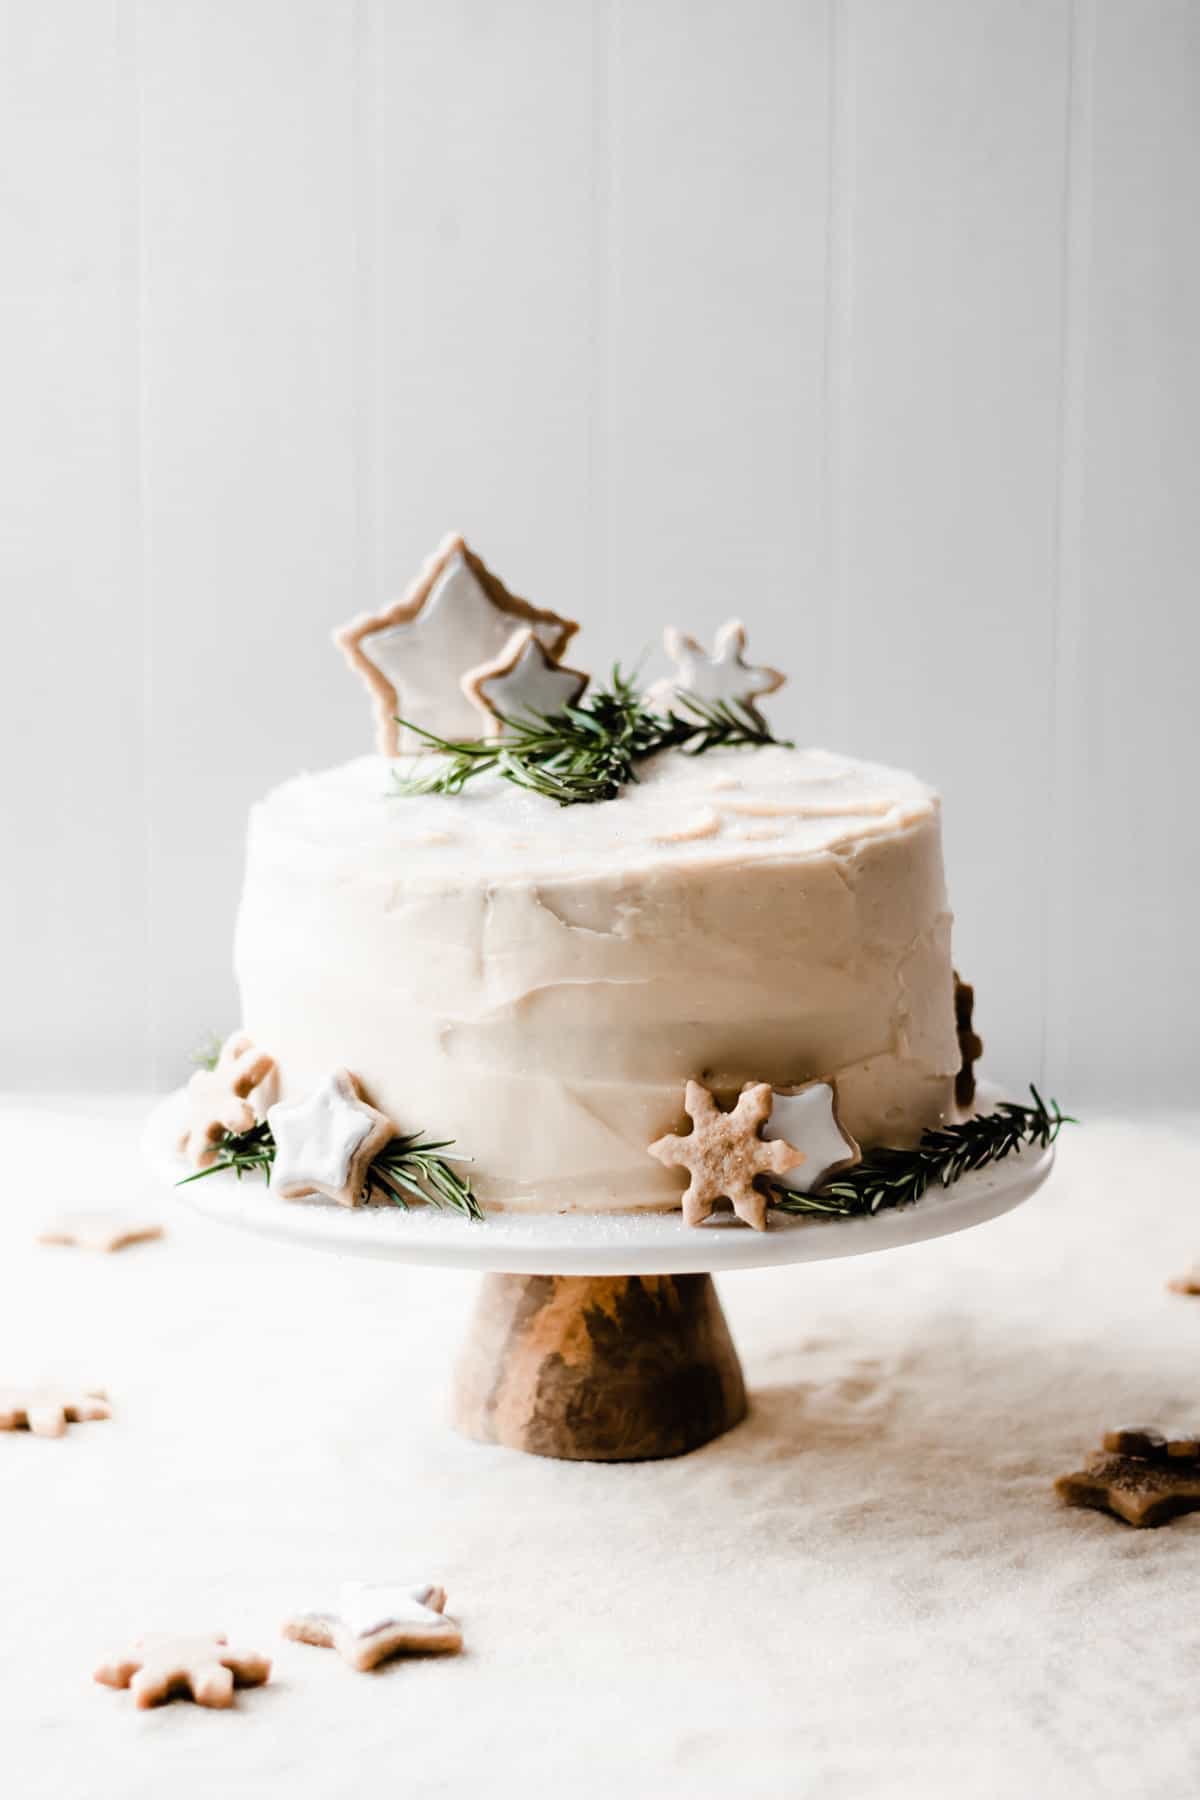 Winter Cakes: 4 Festive Recipes That Will Warm Your Heart